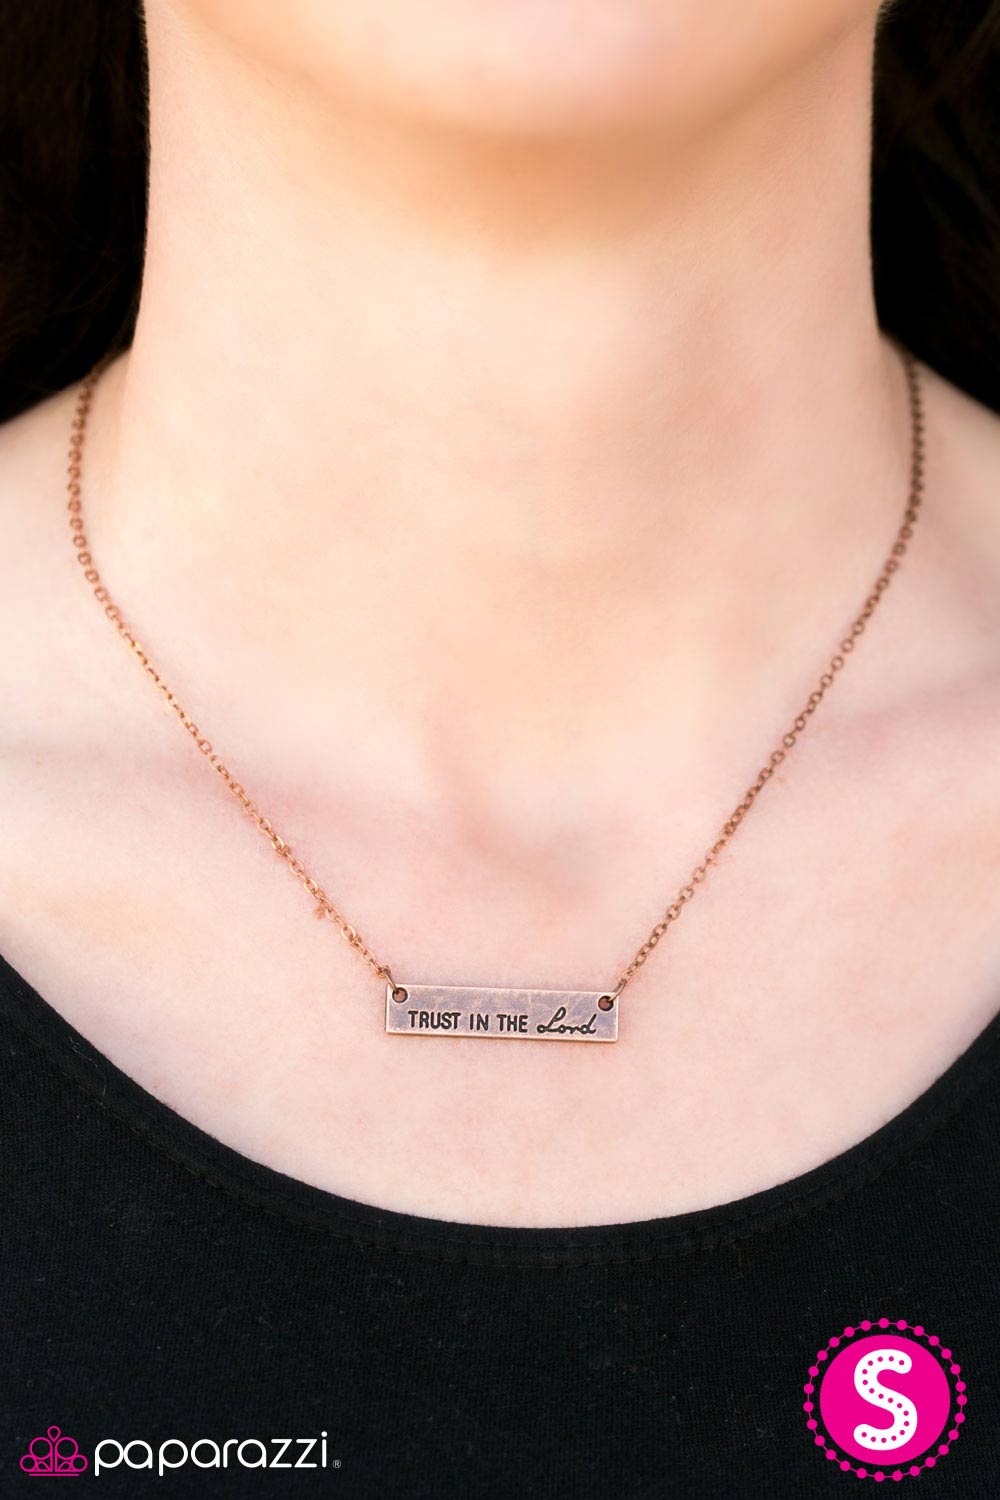 Trust In The Lord - Paparazzi necklace